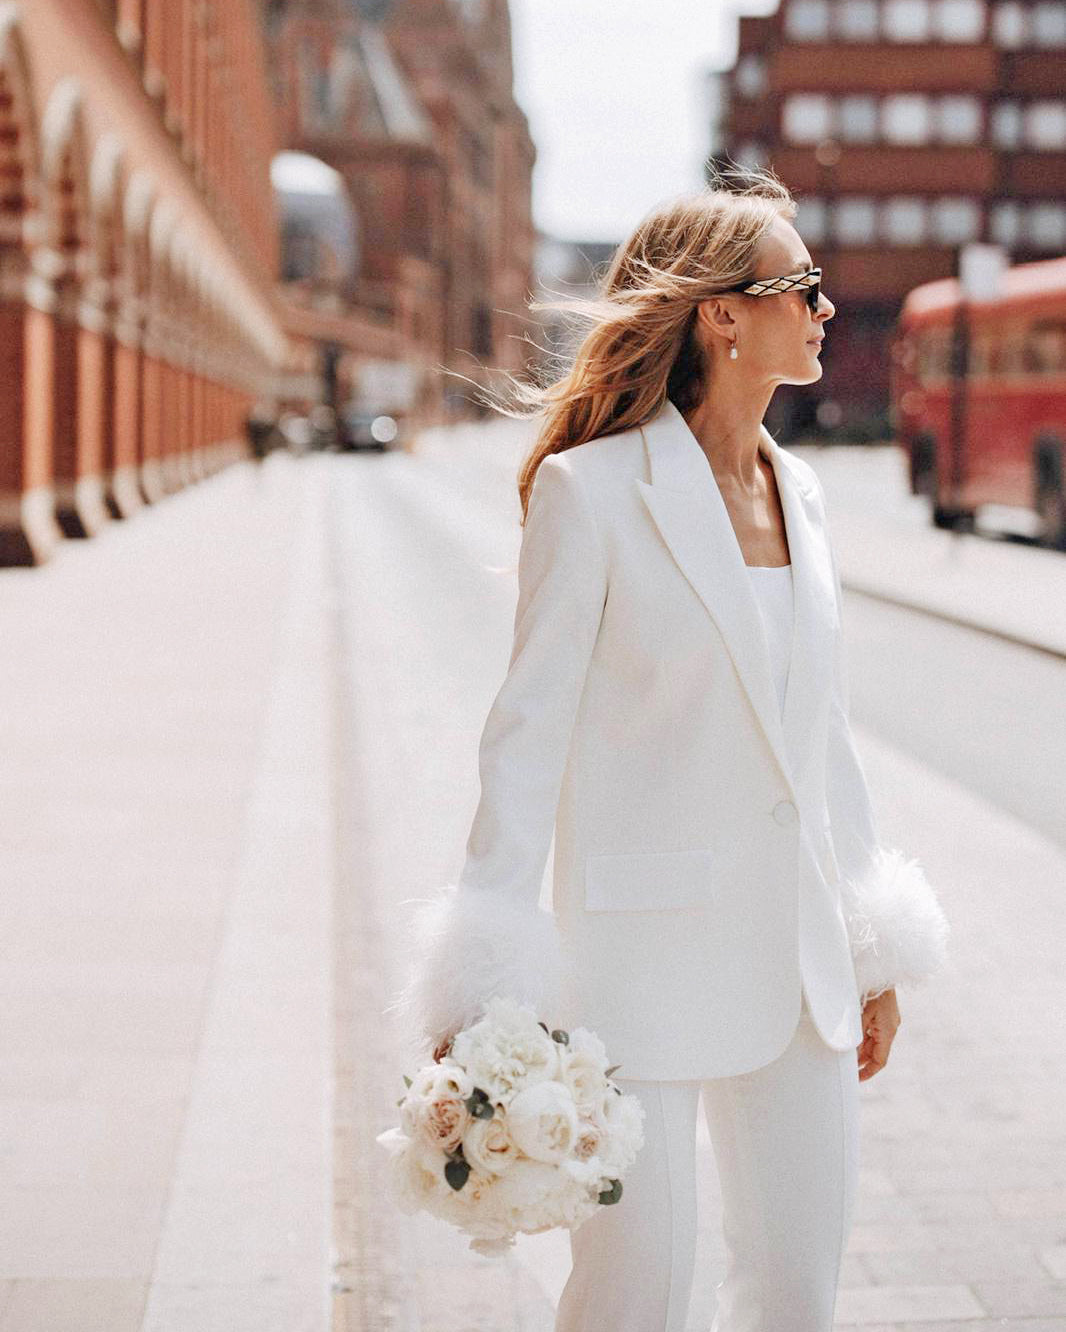 Modern chic bride in white suit holding classic bridal bouquet with peonies and white roses